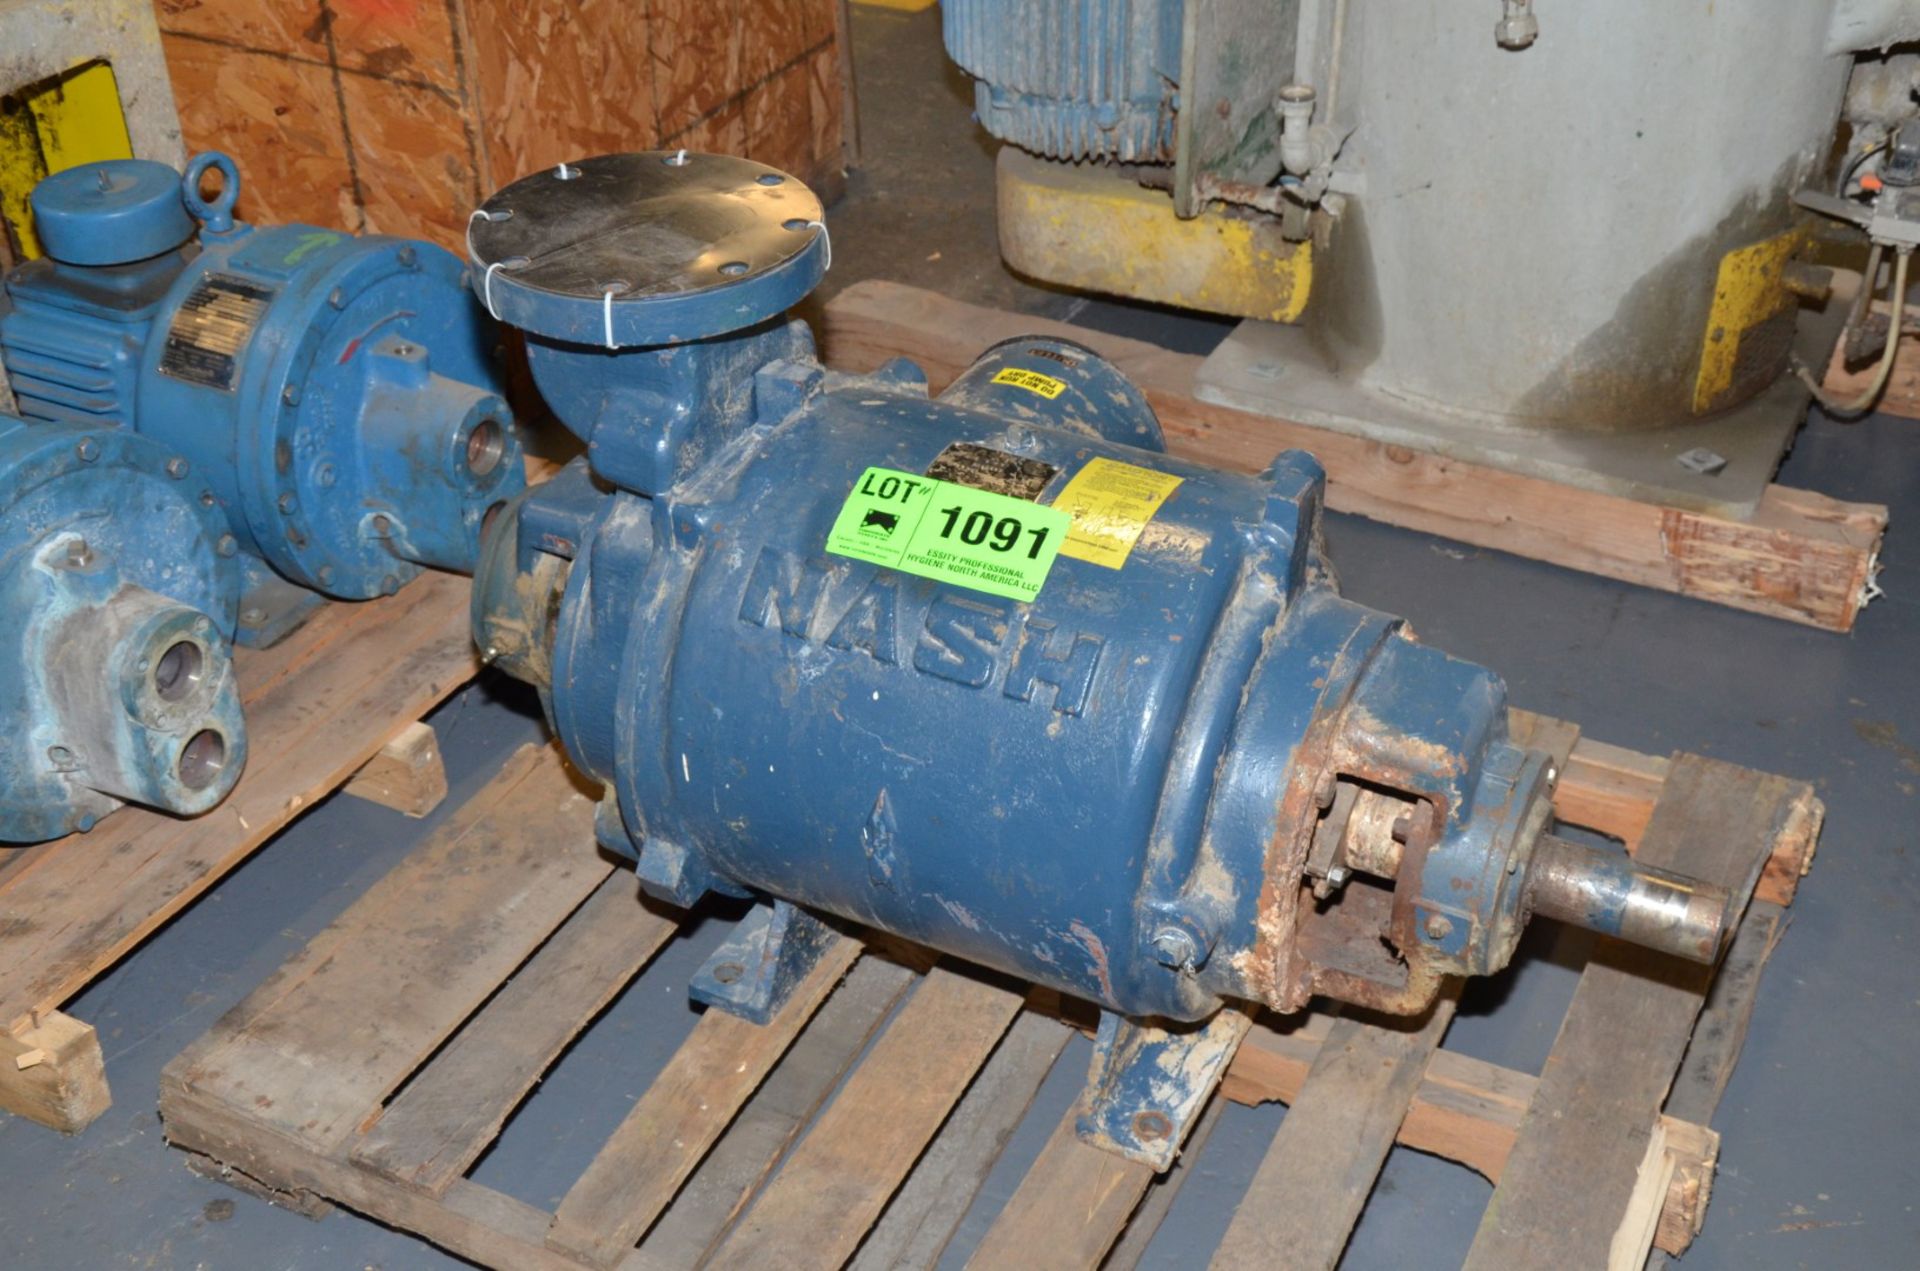 NASH SIZE SC6/7 VACUUM PUMP WITH 1170 RPM RATING, S/N TEST # 98D0517 [RIGGING FEE FOR LOT #1091 - $